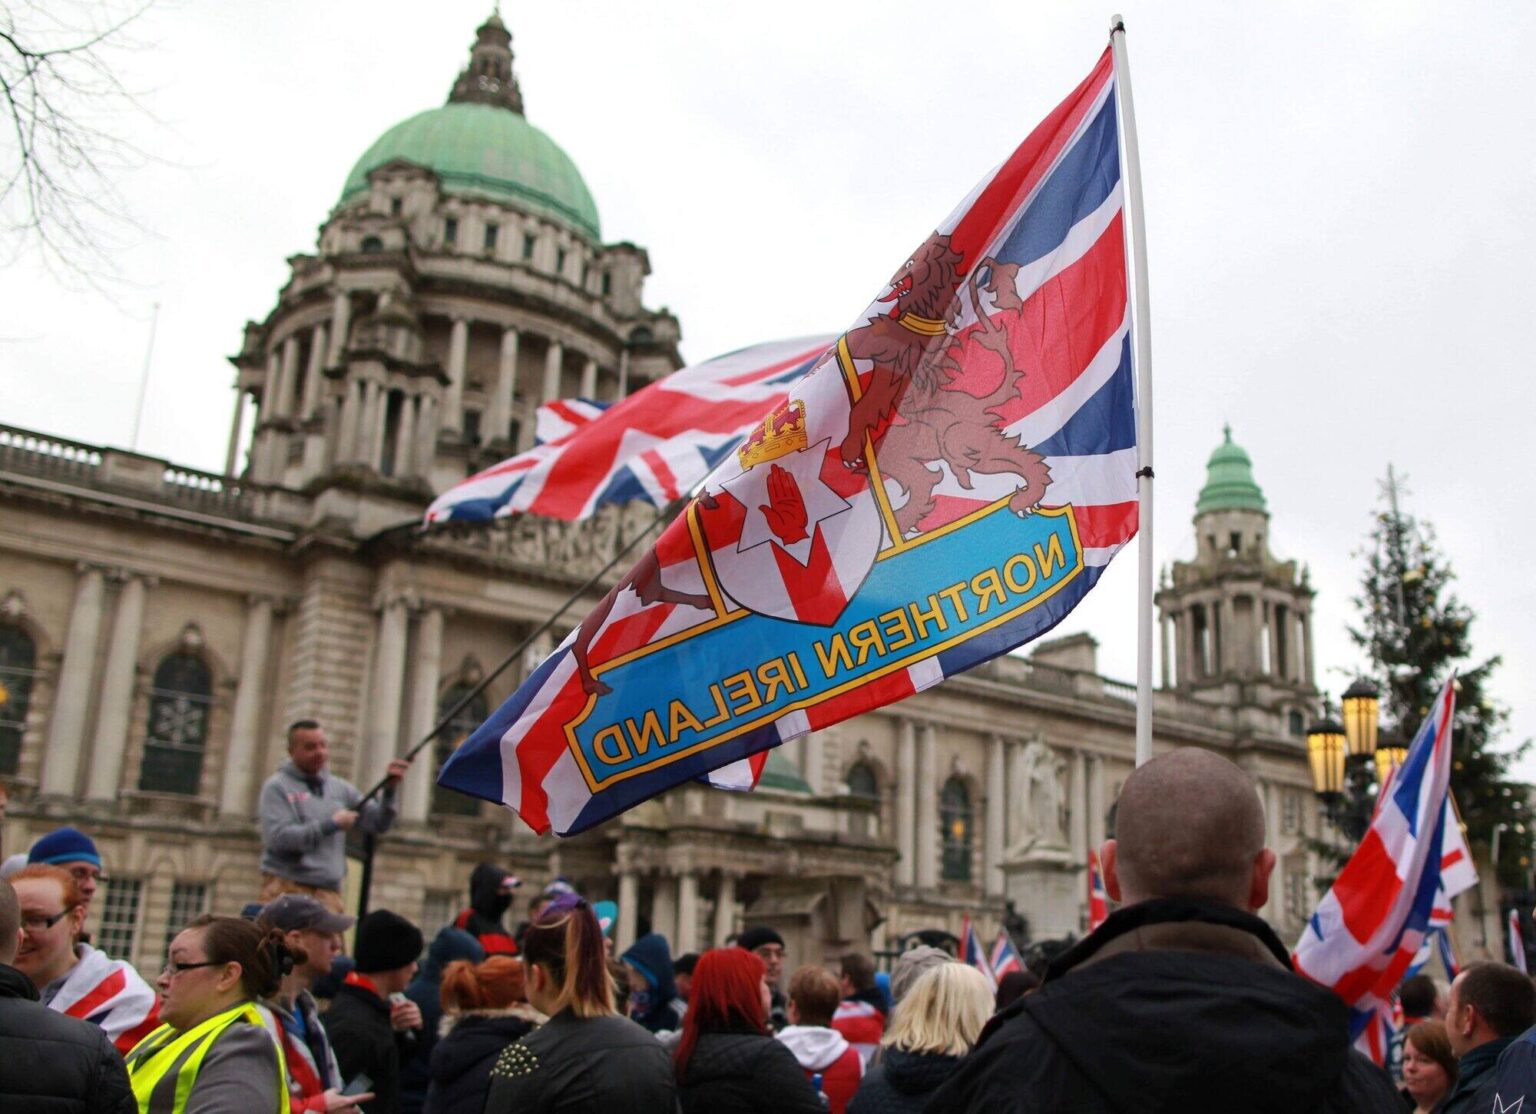 Do you know what's happening in Northern Ireland this week? Violent protests are causing a lot of concern. Check out what went down in Belfast.